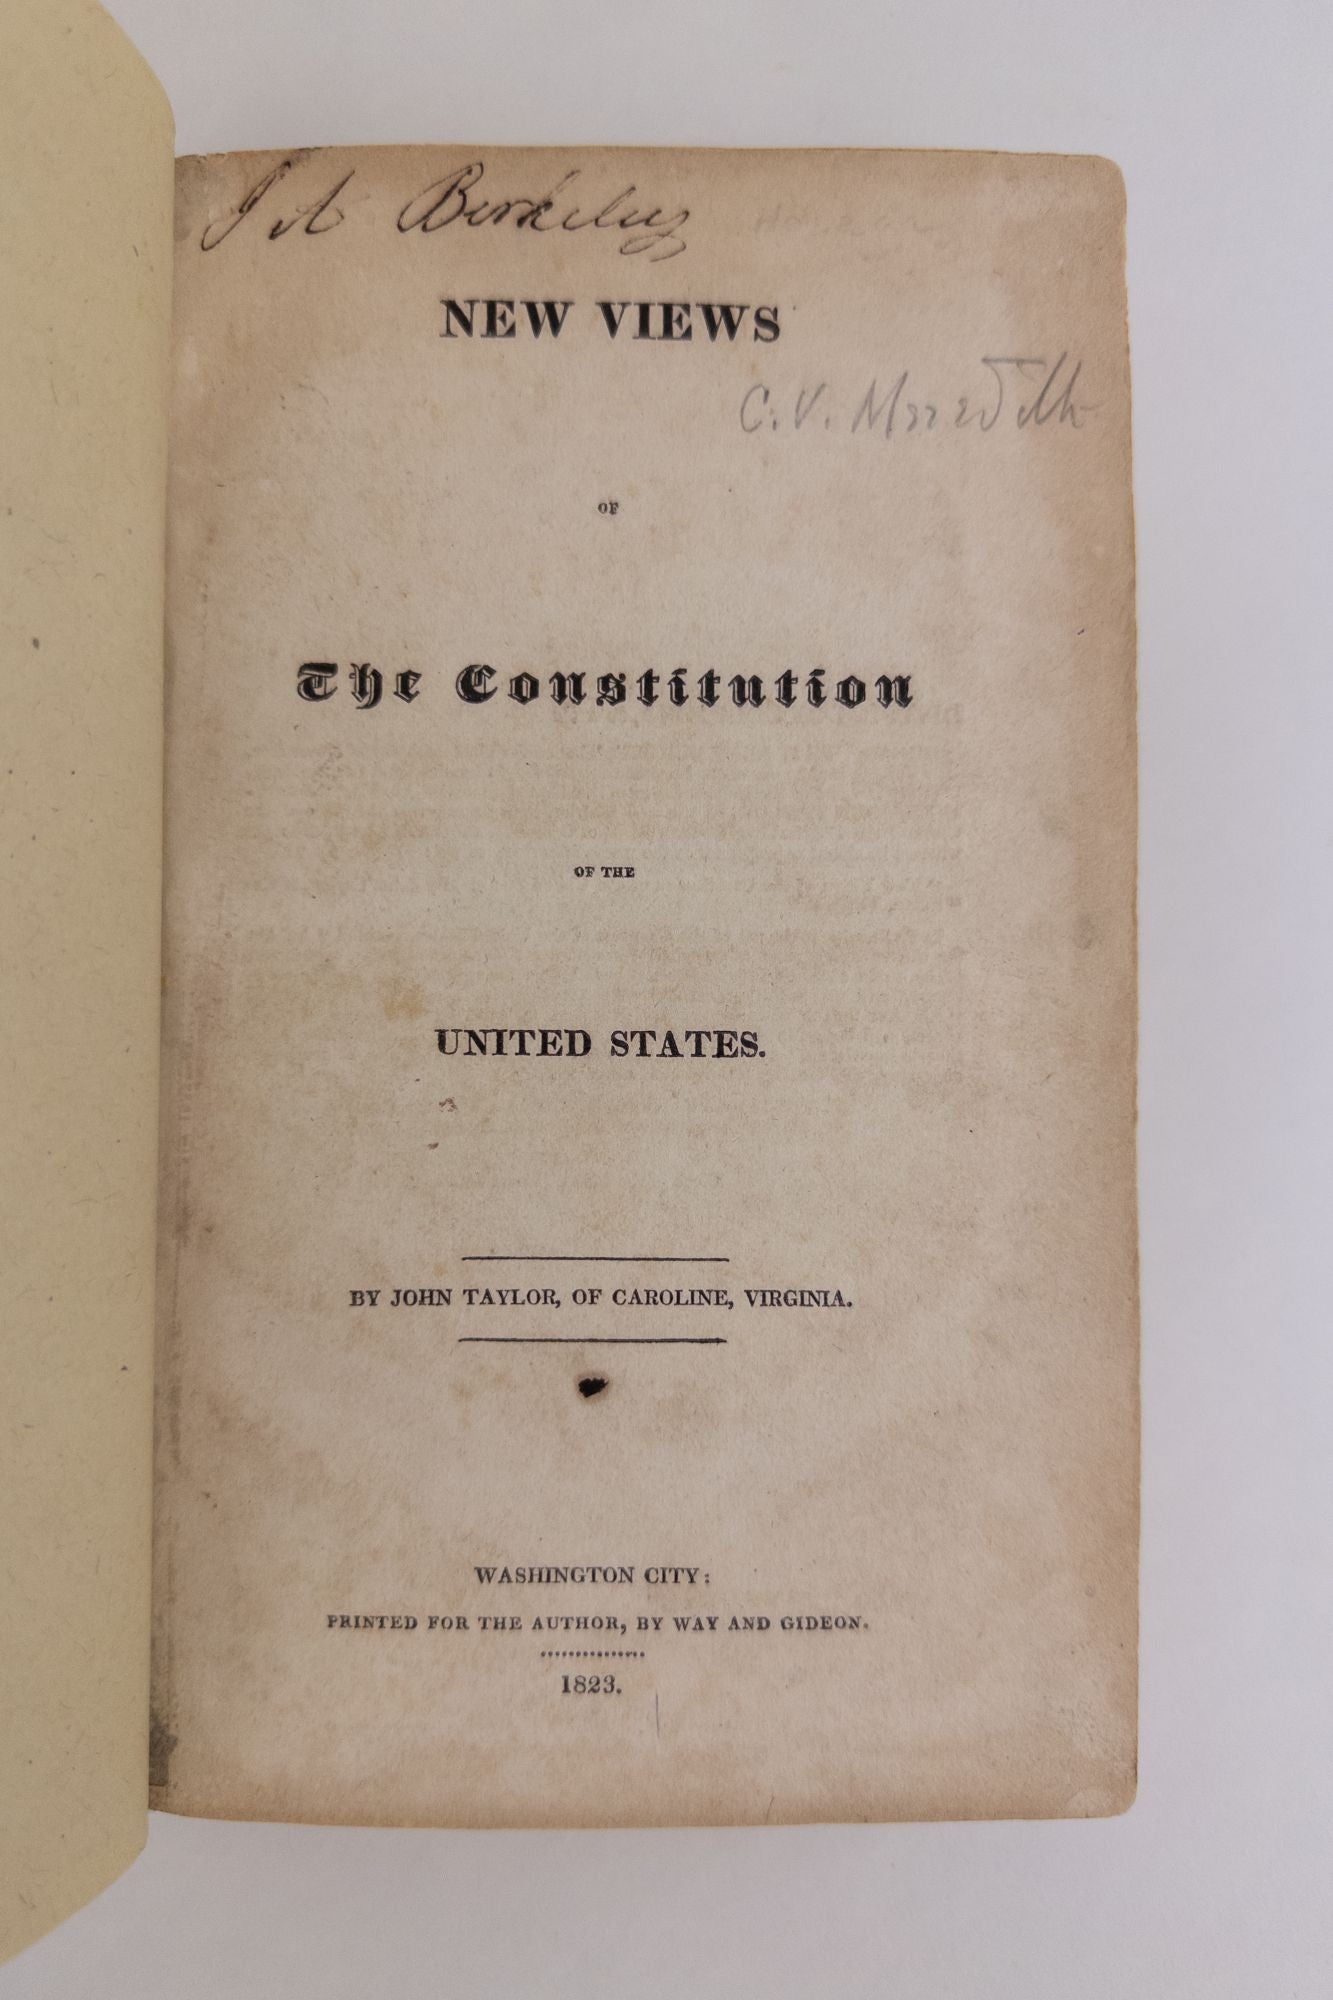 Product Image for NEW VIEWS OF THE CONSTITUTION OF THE UNITED STATES